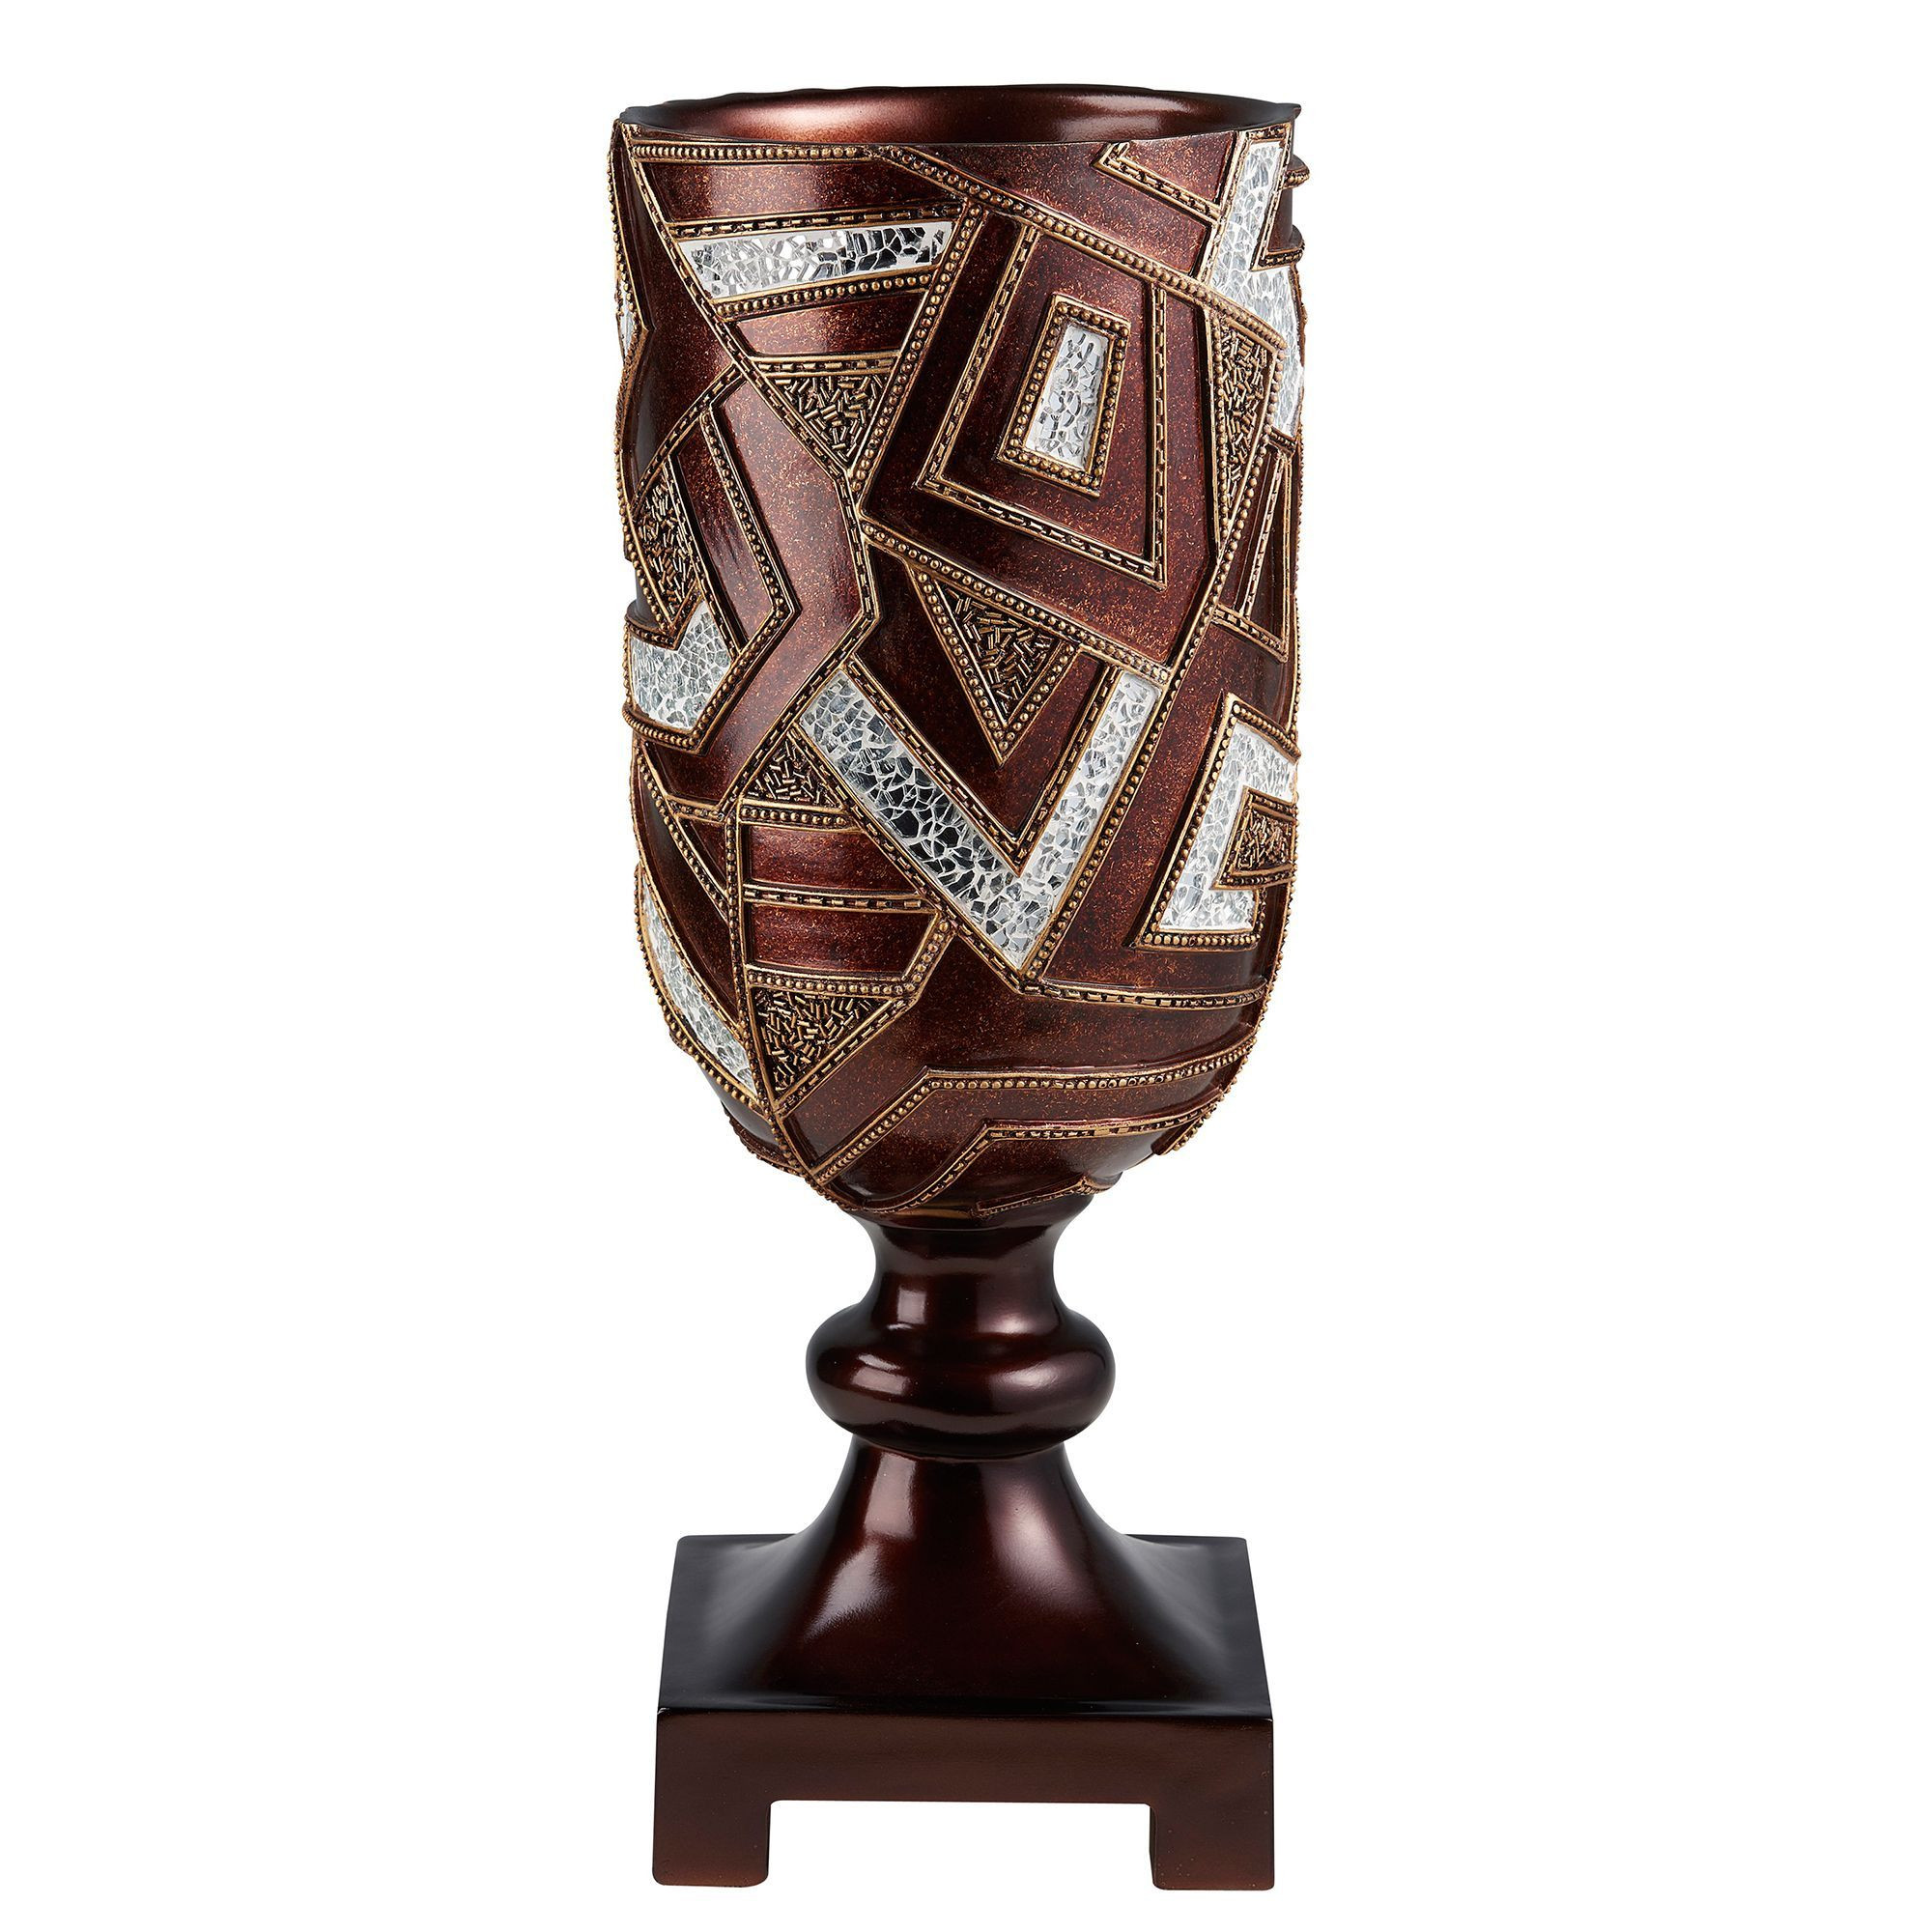 20 attractive Cracked Glass Vases wholesale 2023 free download cracked glass vases wholesale of ore international gold and brown polyresin 19 75 inch mosaic inside ore gold and 19 75 inch mosaic decorative vase